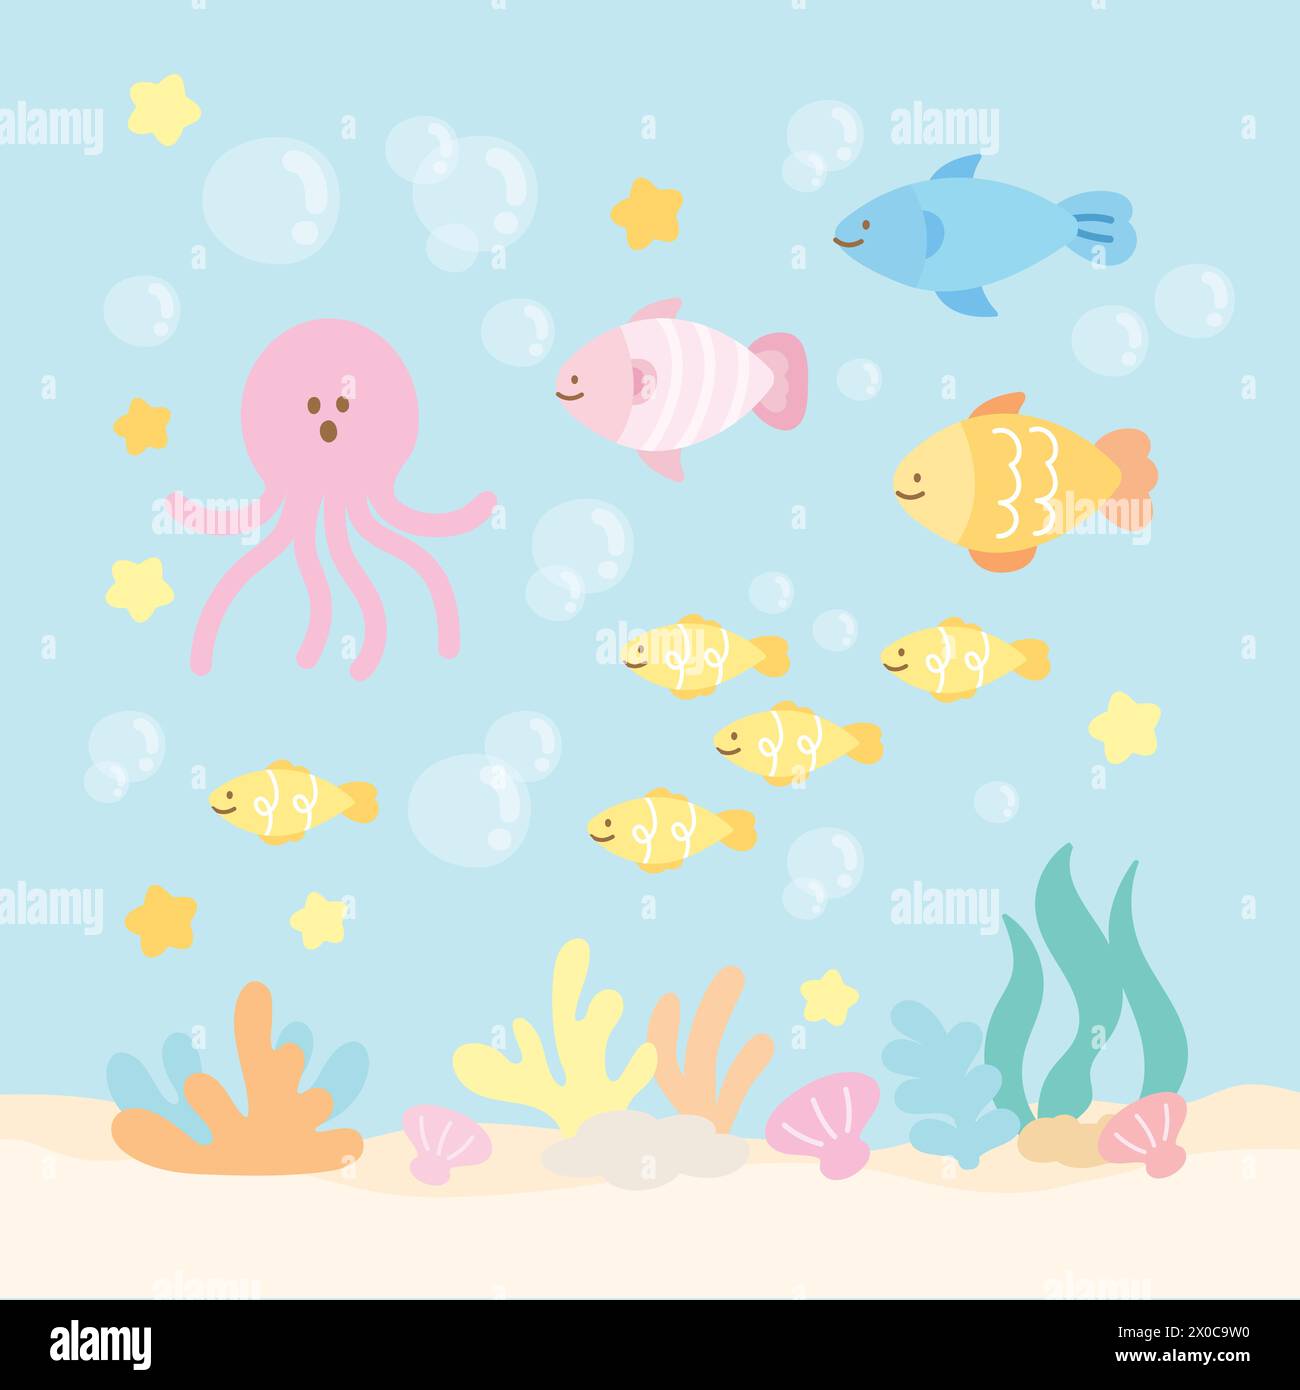 Pastel illustrations of under the sea including fish, coral reef, octopus, sea shell for aquarium, marine lives, background, ocean view, wallpaper Stock Vector